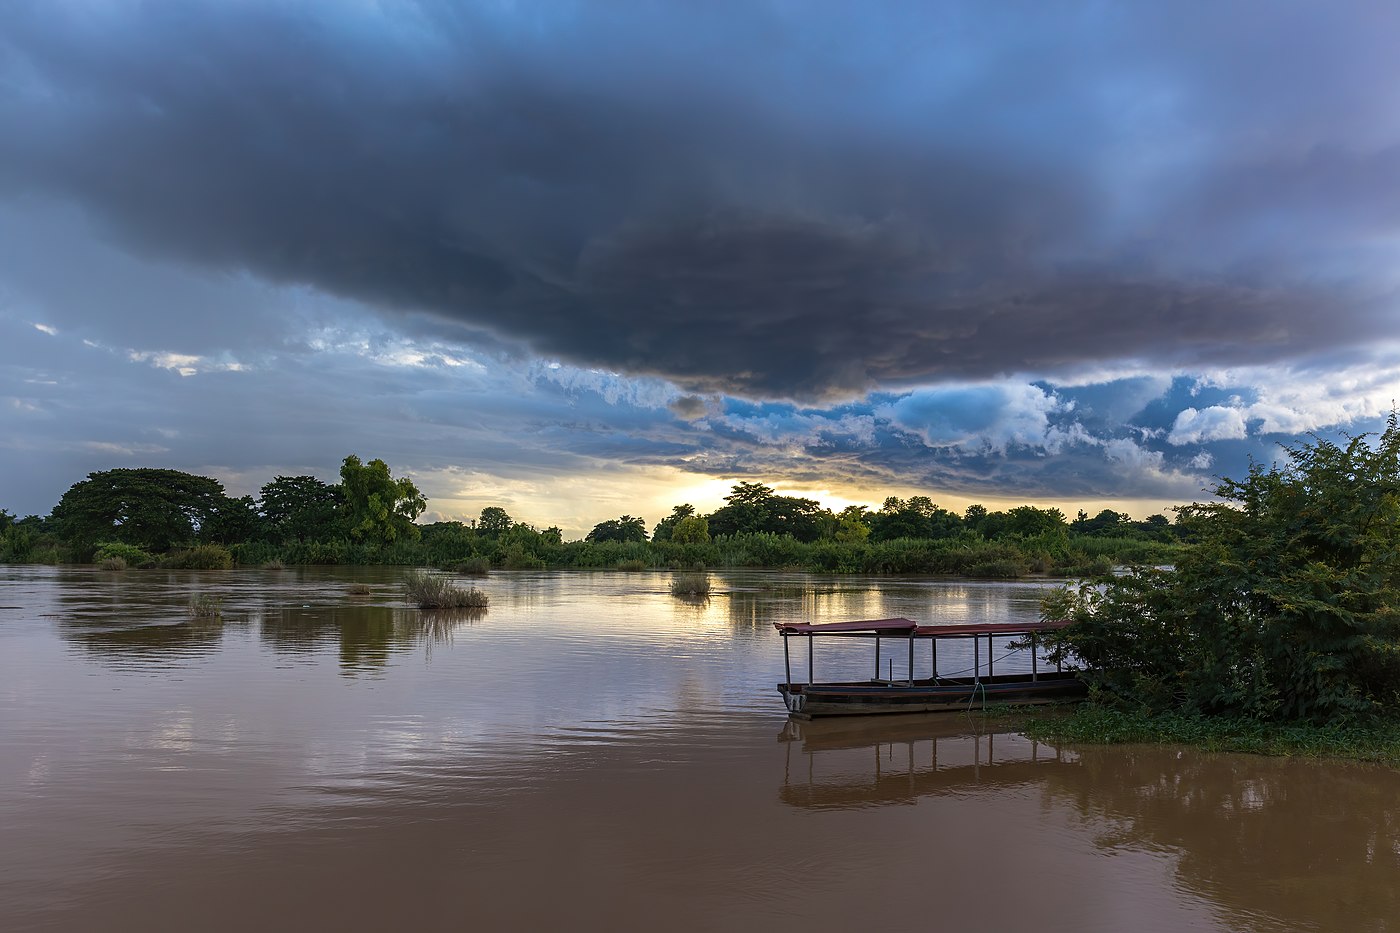 Blue stormy clouds over the Mekong at sunset with water reflection and a pirogue moored to the bank